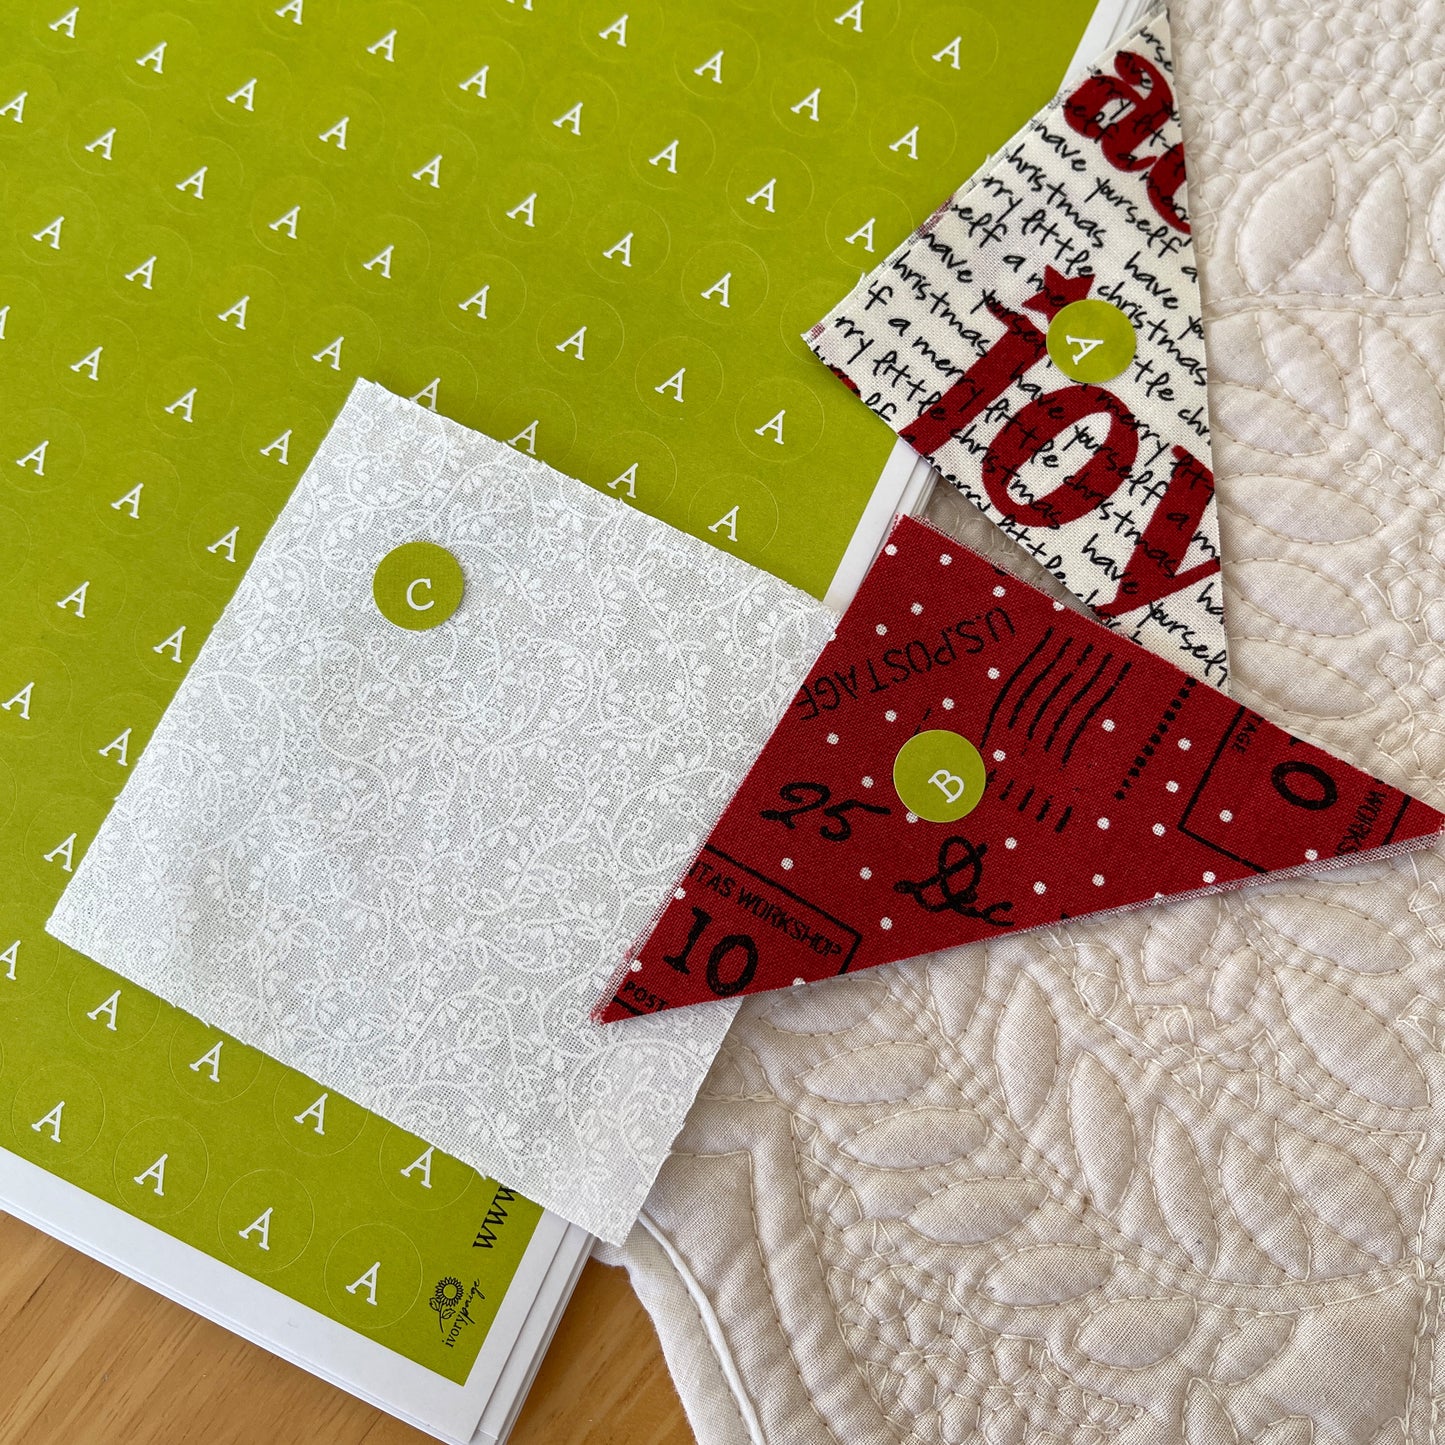 Green letter stickers for quilt sewing pieces on fabric